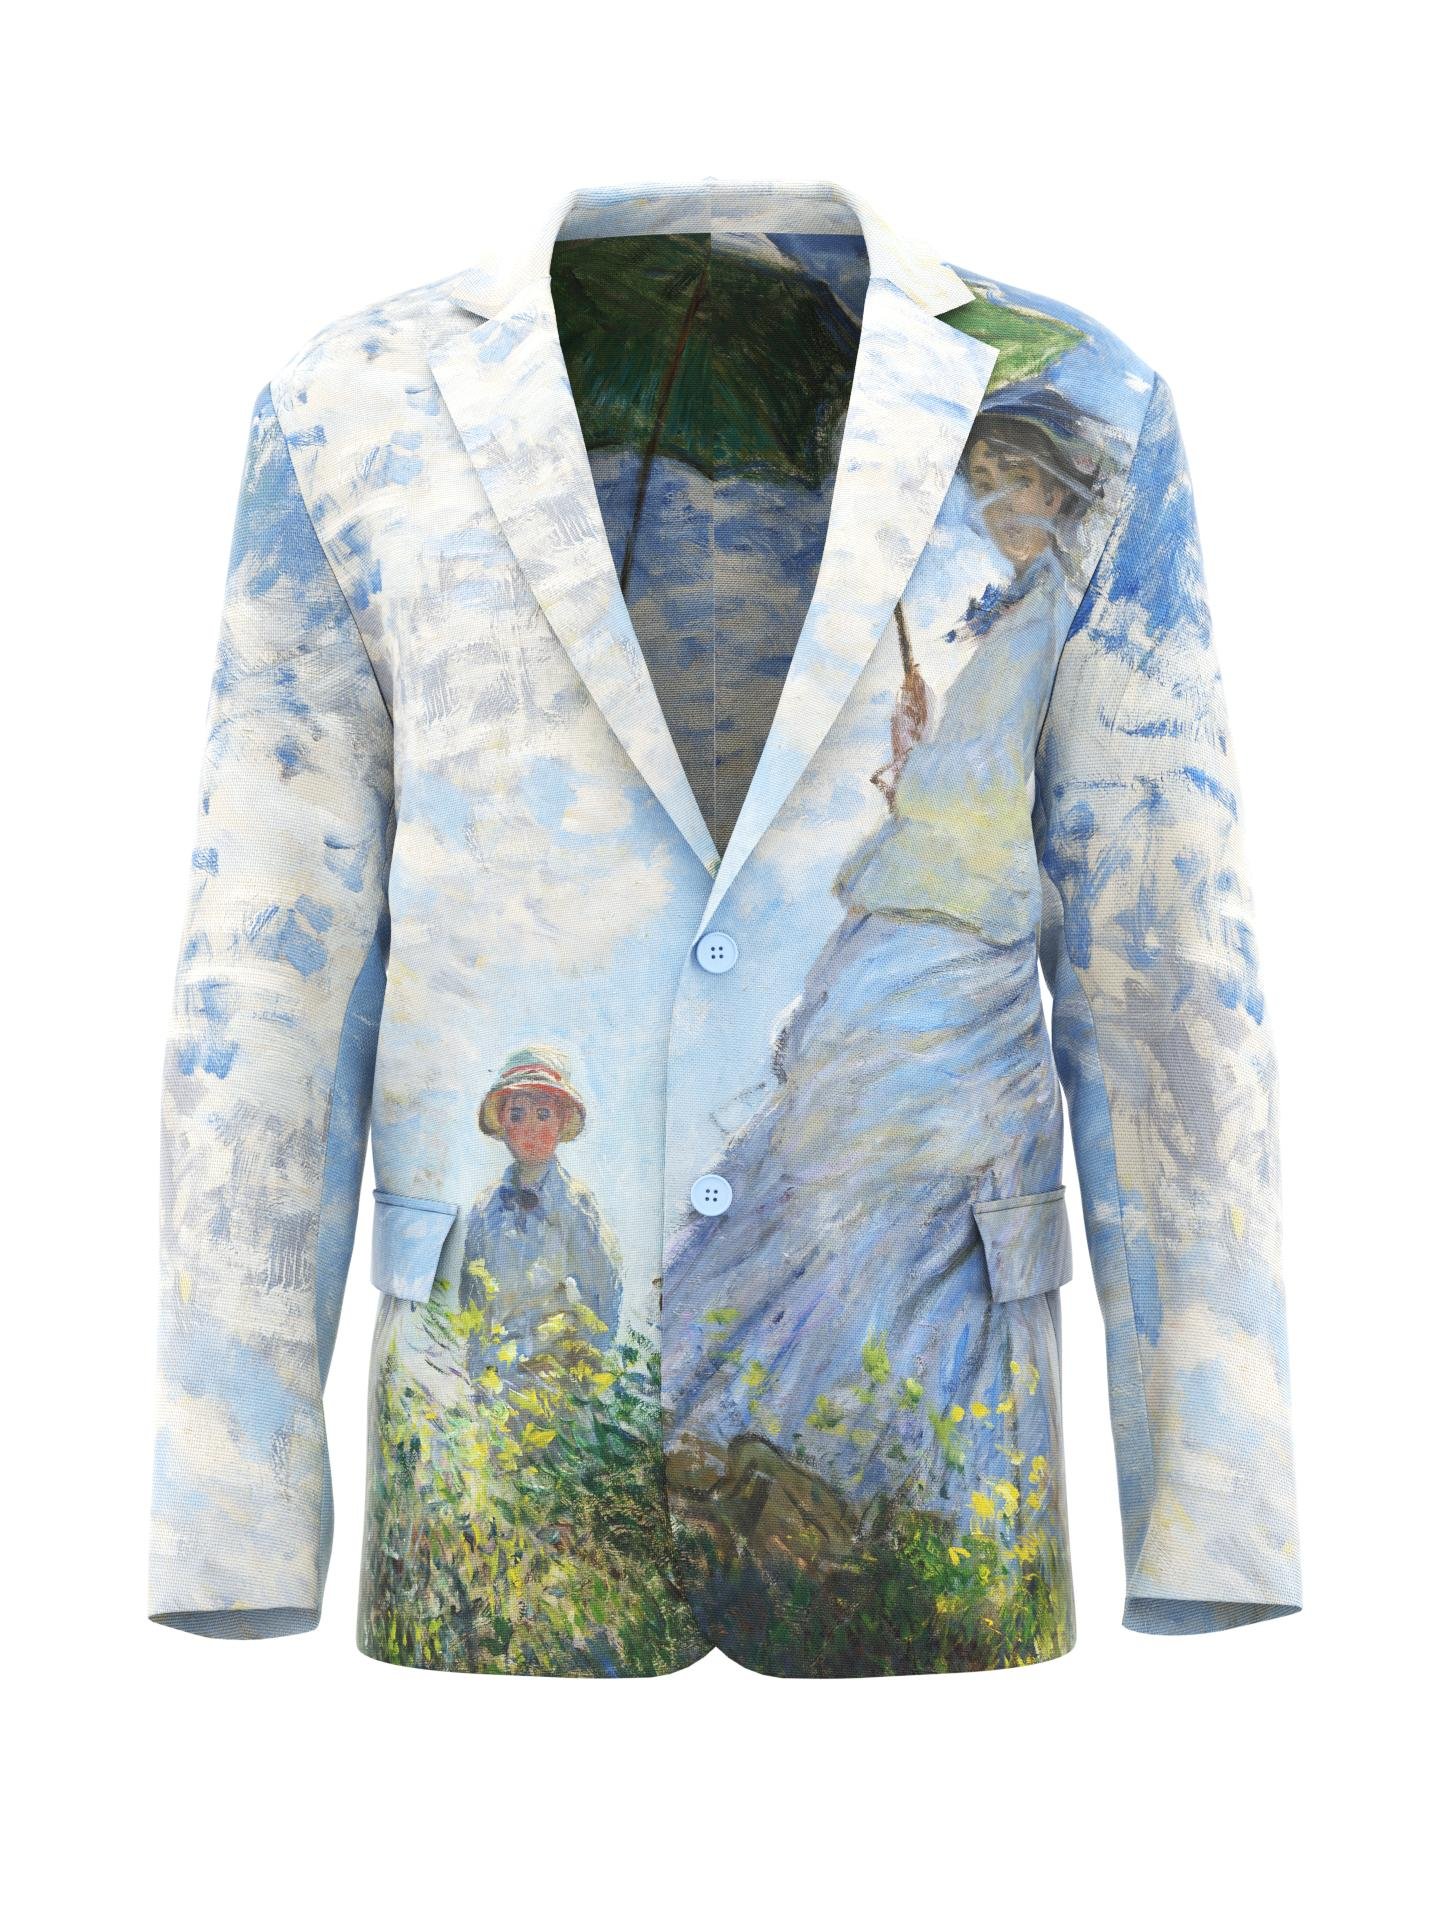 Blazer - Woman with a Parasol - Madame Monet and Her Son by DRESSX